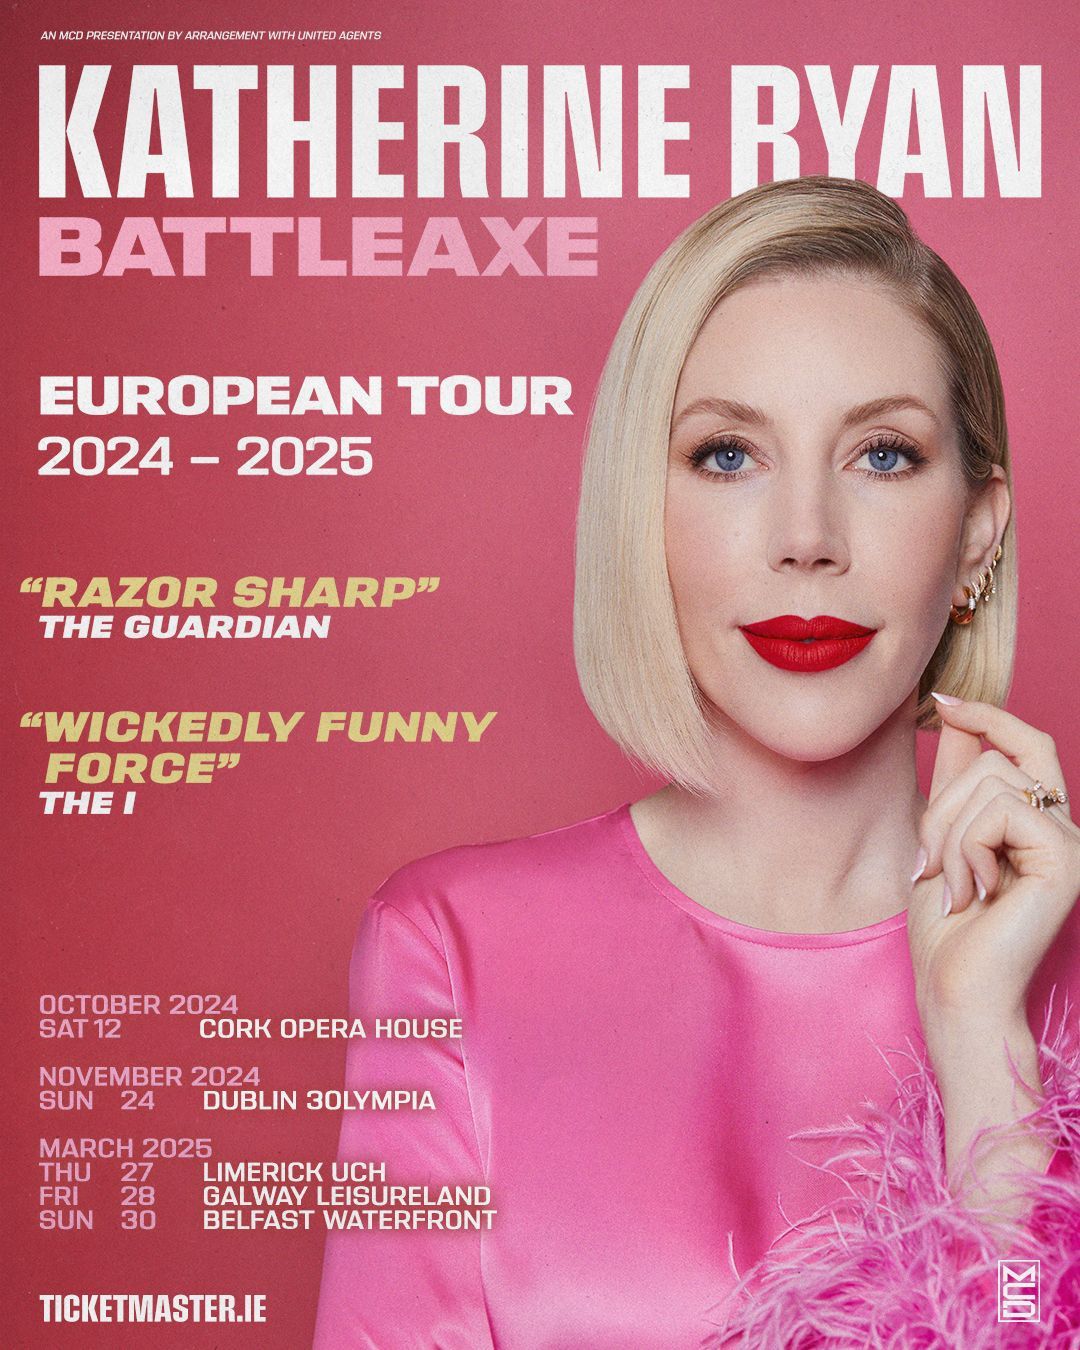 Katherine Ryan brings her new live show Battleaxe to Cork, Dublin, Limerick, Galway and Belfast.  Tickets go on sale this Friday at 10.00am from www.ticketmaster.ie and venue box offices.